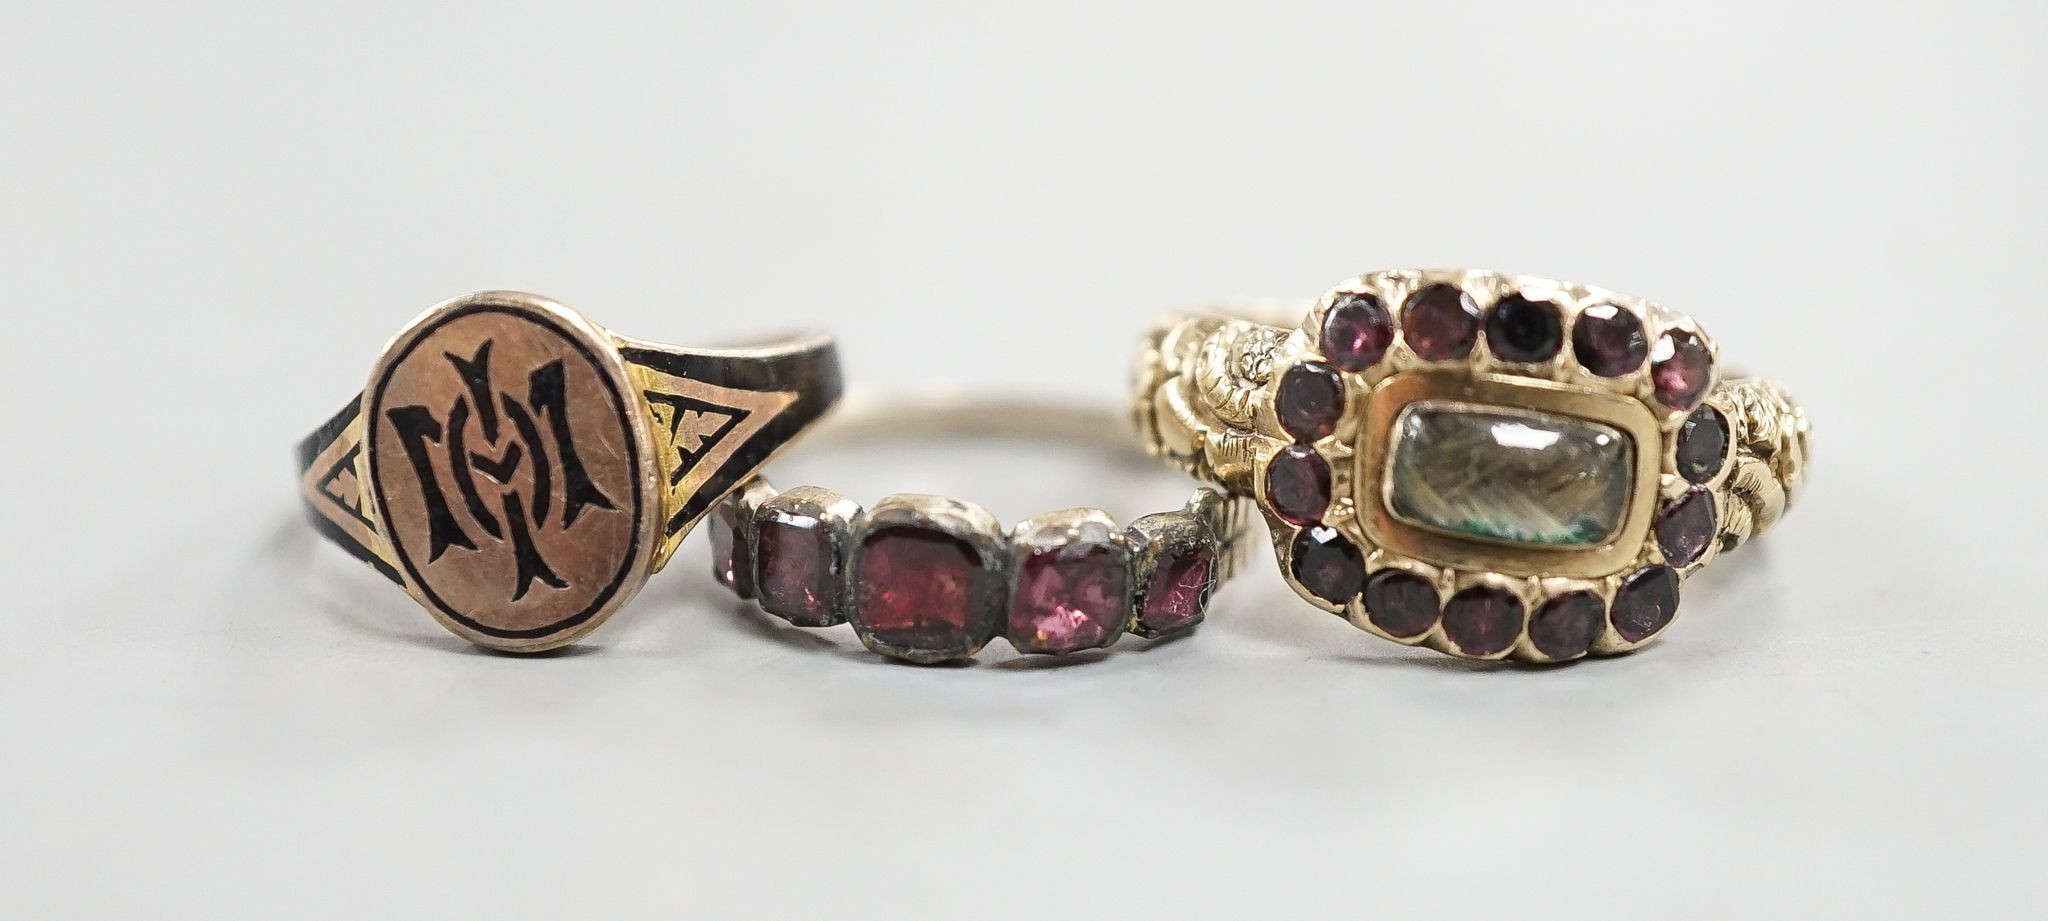 A late George III yellow metal, garnet and plaited hair mounted mourning ring, inscribed 'Ann Haycock Obt. 1 Mar. 1817 at 25, Mary Haycock ob, 26 Mar, 1817 at 15' size N/O, gross 4.6 grams and two other antique rings.